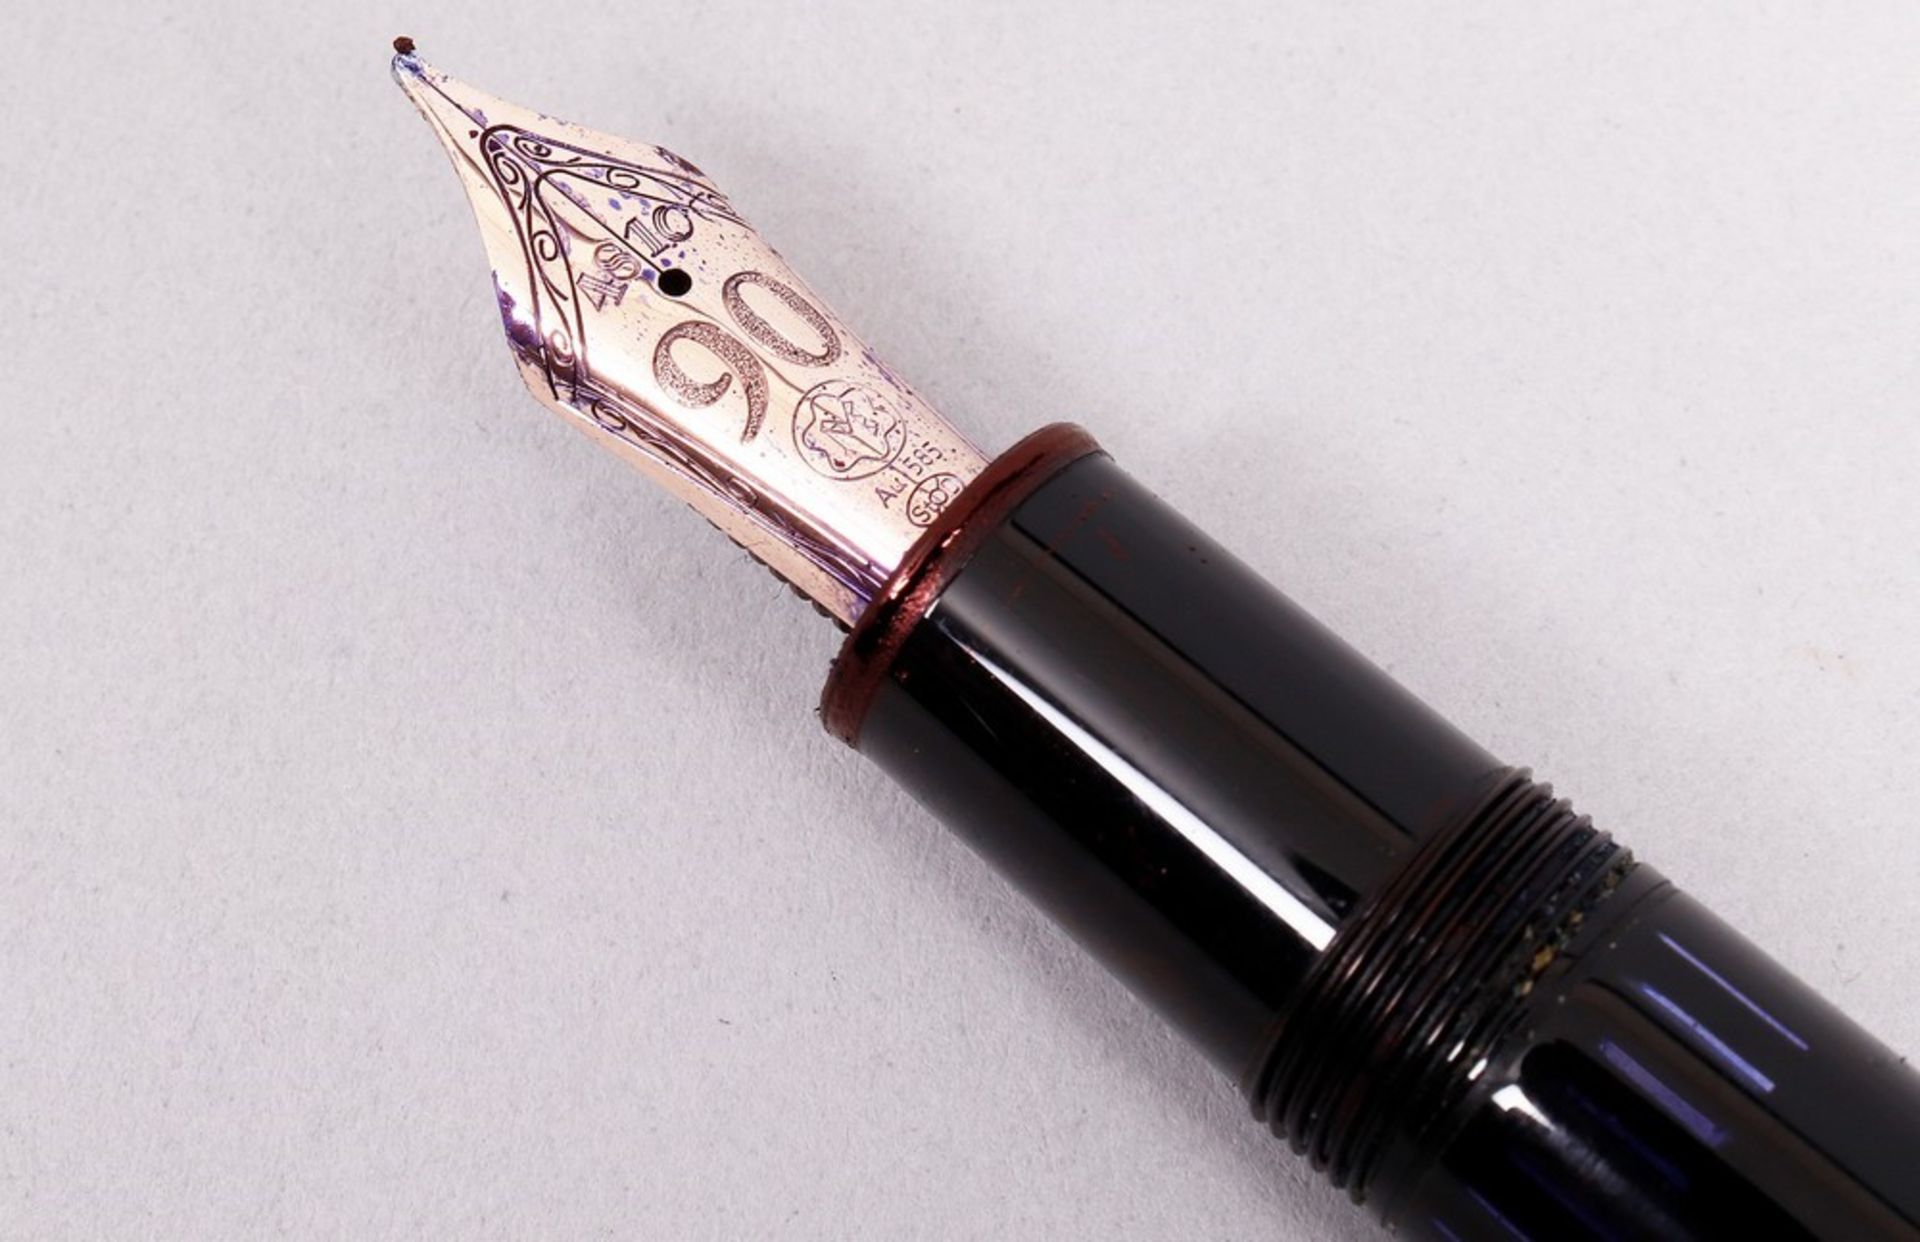 Fountain pen, Montblanc, Meisterstück 146, 90 years Edition Le Grand - Image 3 of 5